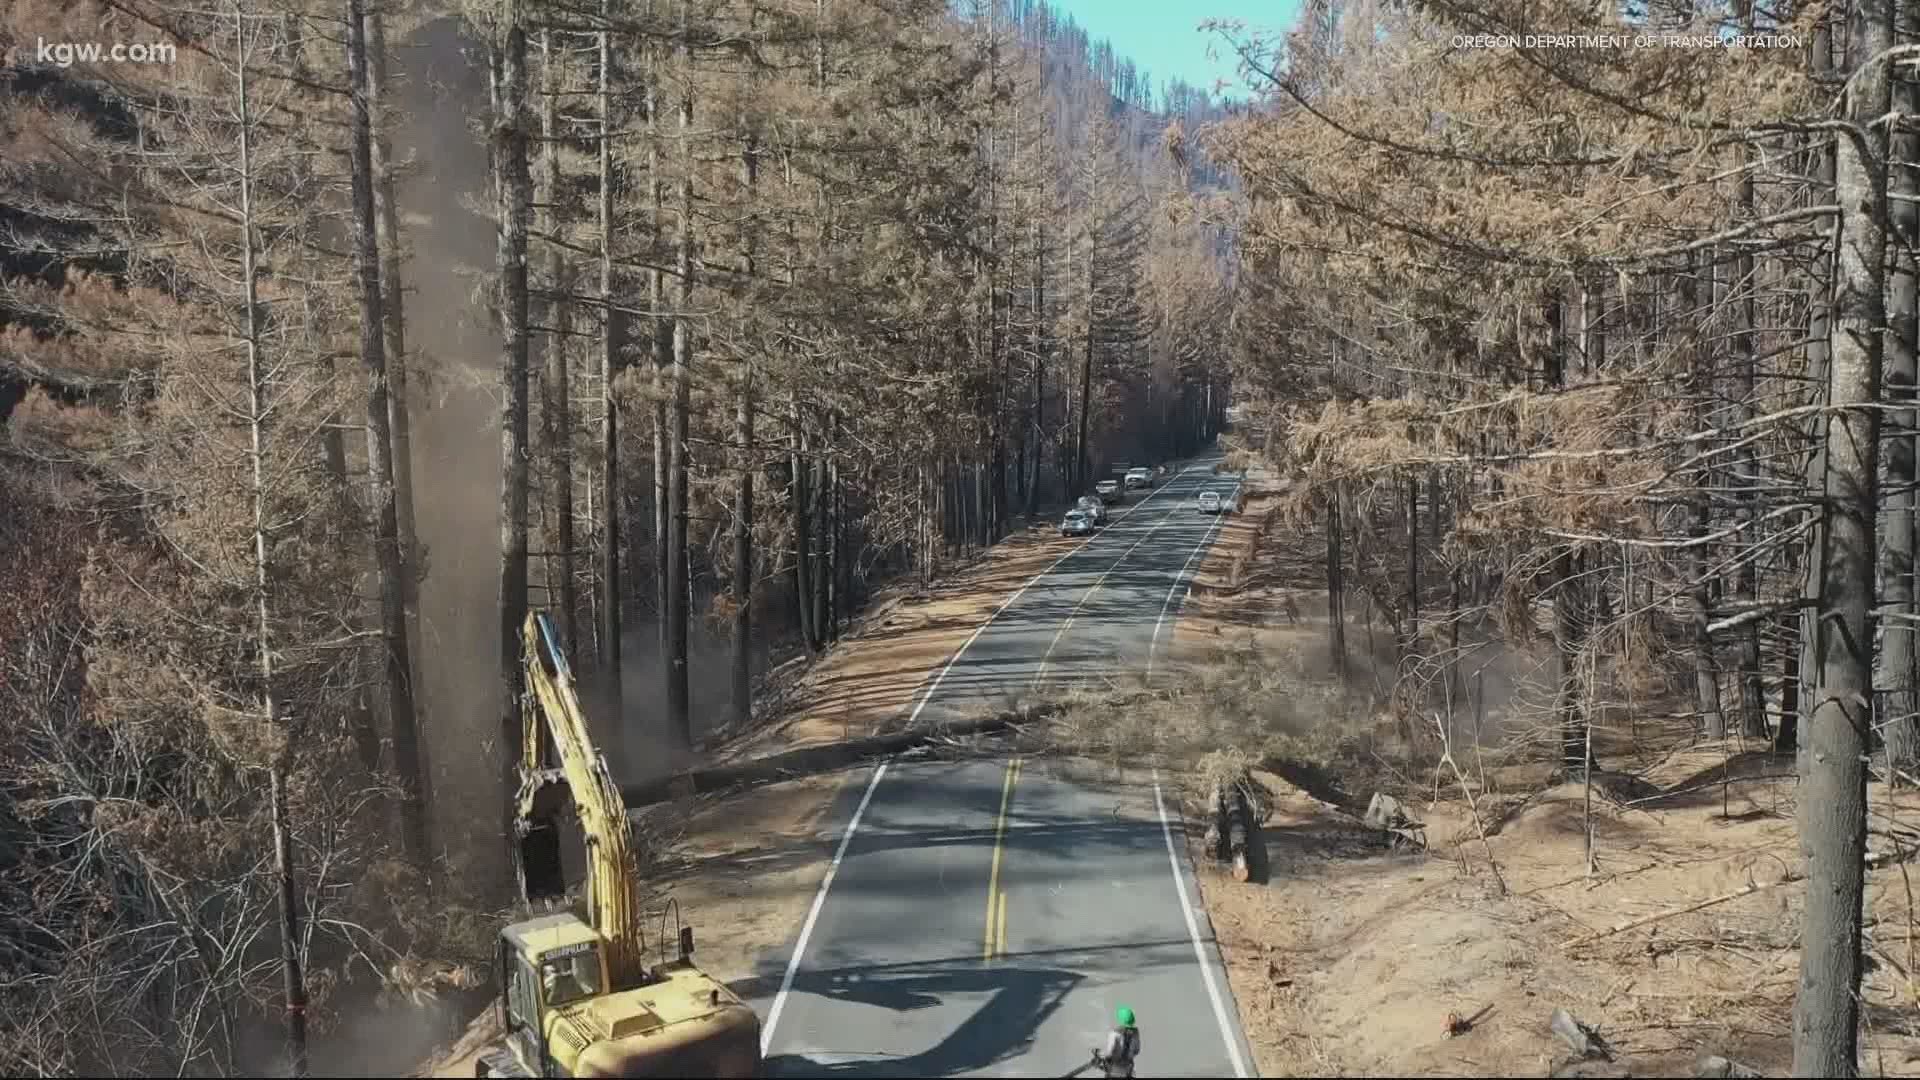 ODOT has reopened most of the Oregon roads impacted by September’s historic wildfires. Chris McGinness has the latest on the process.